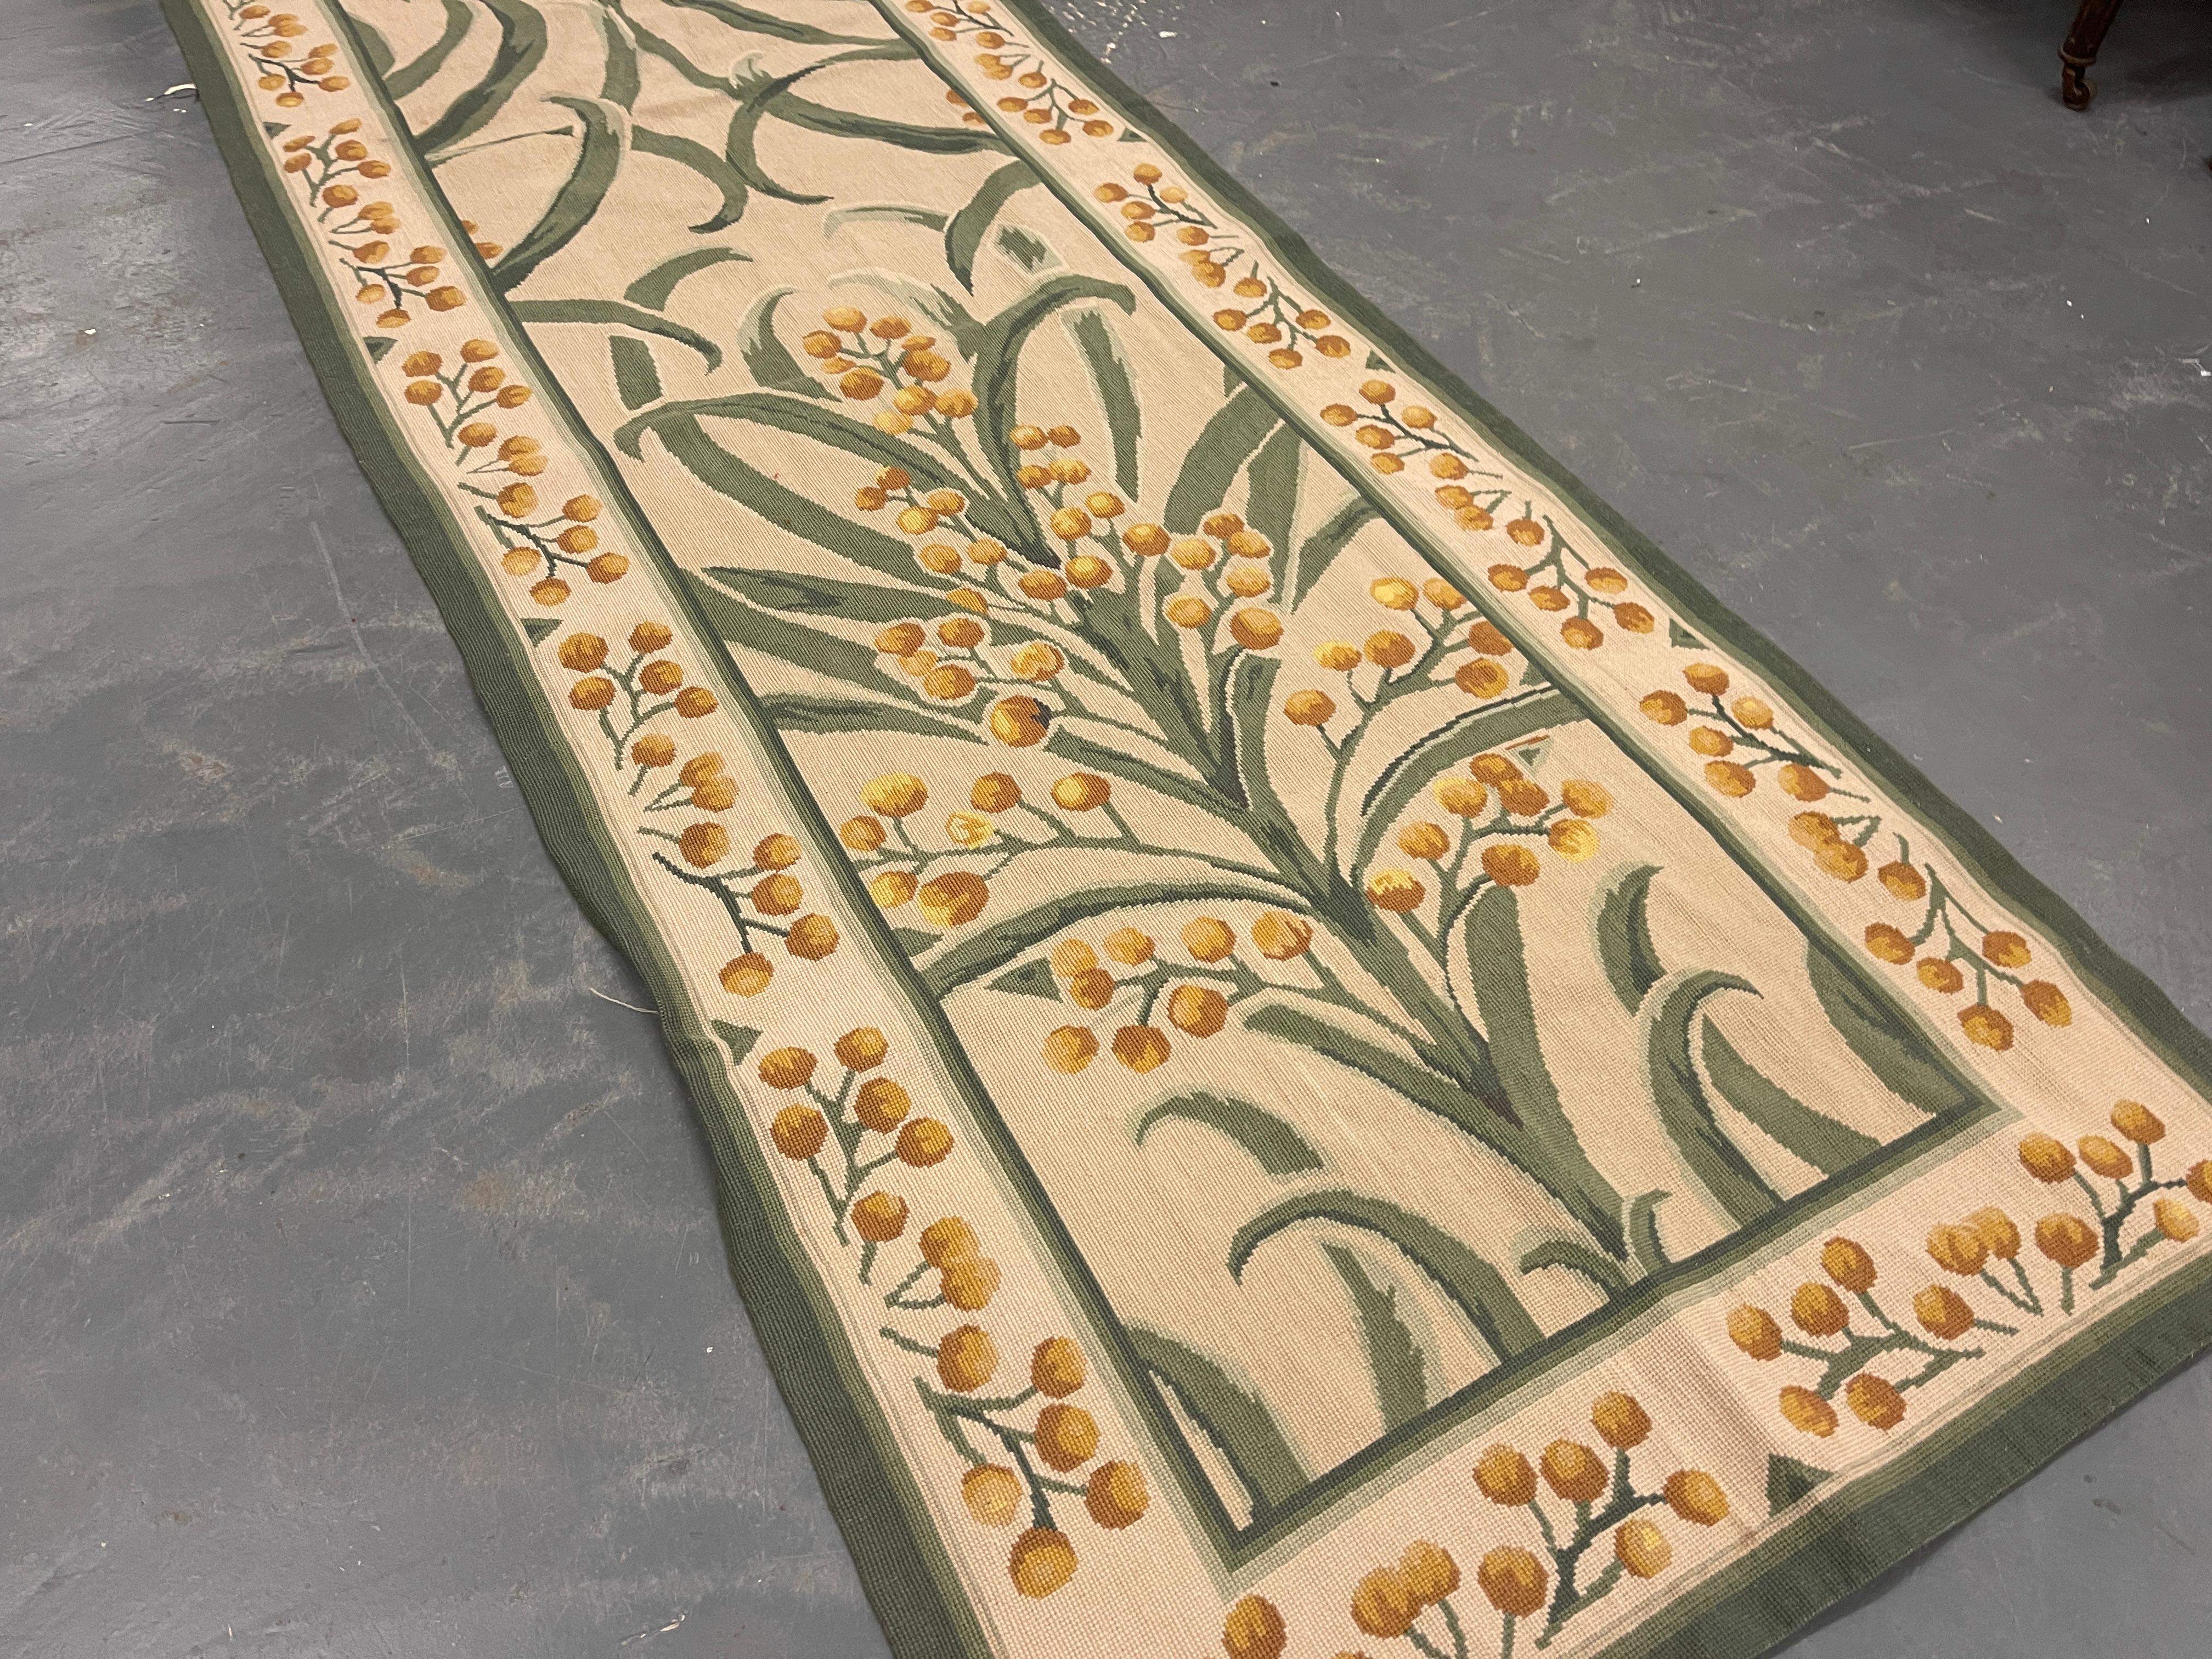 This fantastic area runner rug has been handwoven with a beautiful symmetrical floral design woven on an ivory beige green background with cream green and ivory accents. This elegant piece's colour and design make it the perfect stair runner